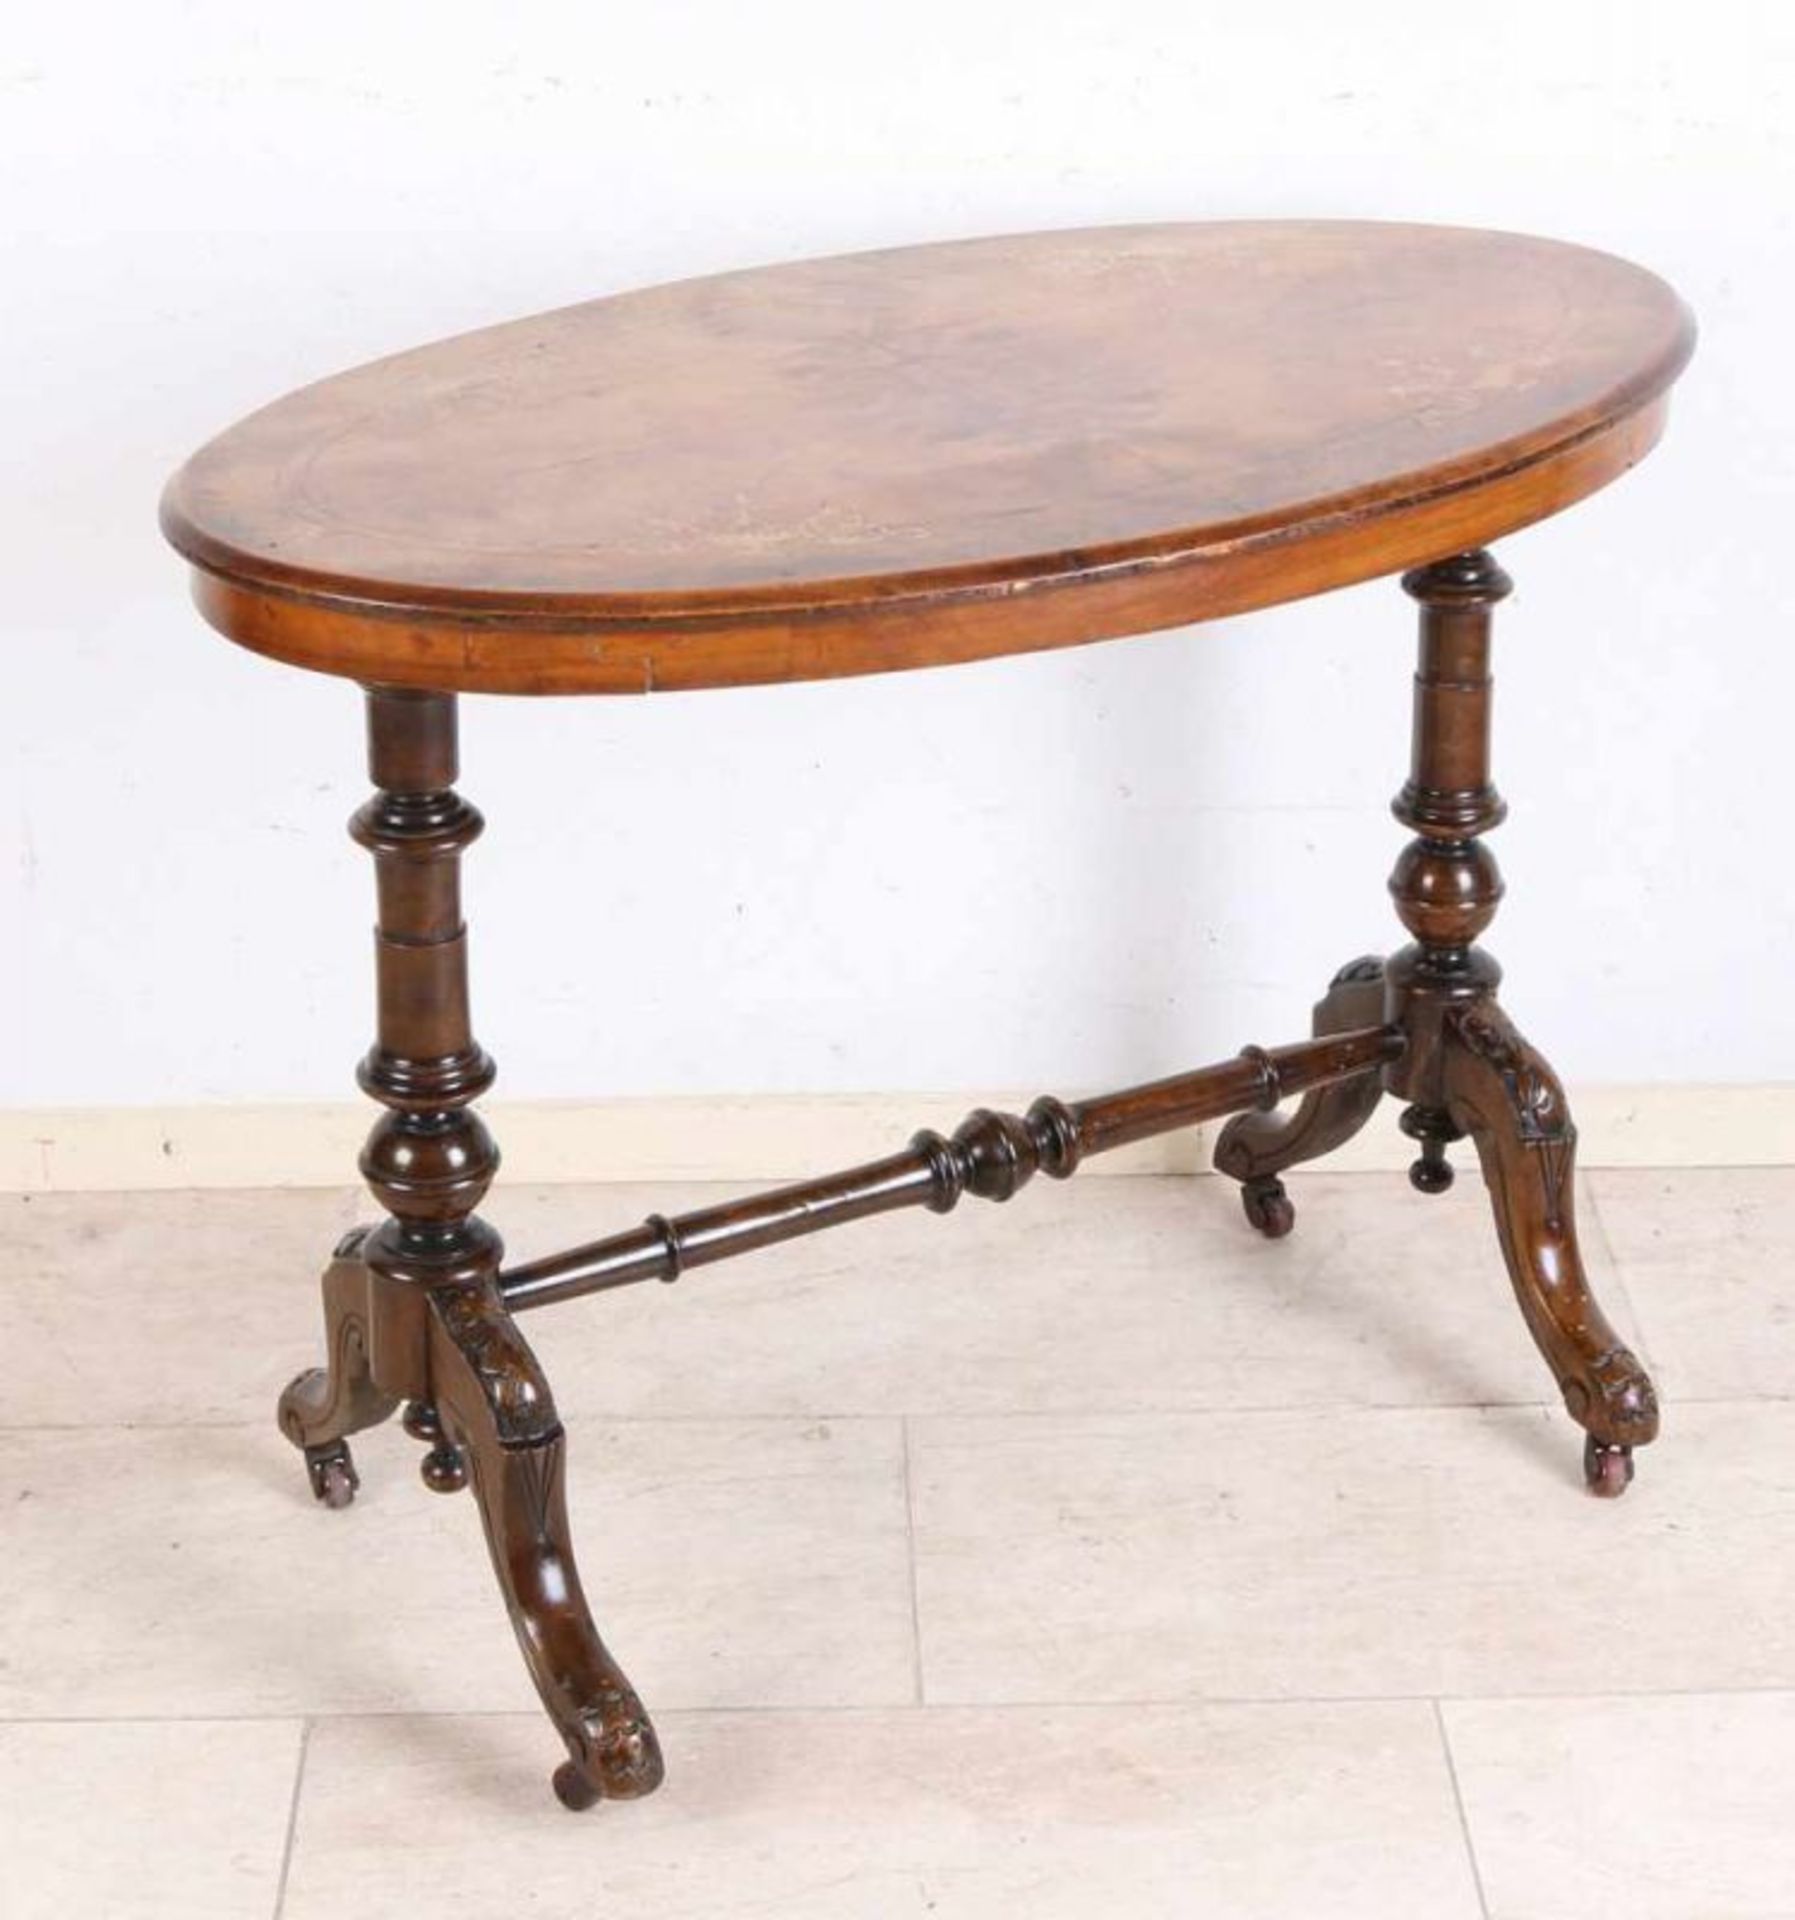 19th century English mahogany oval tea table with intarsia. Dimensions: 68 x 88 x 50 cm. In good